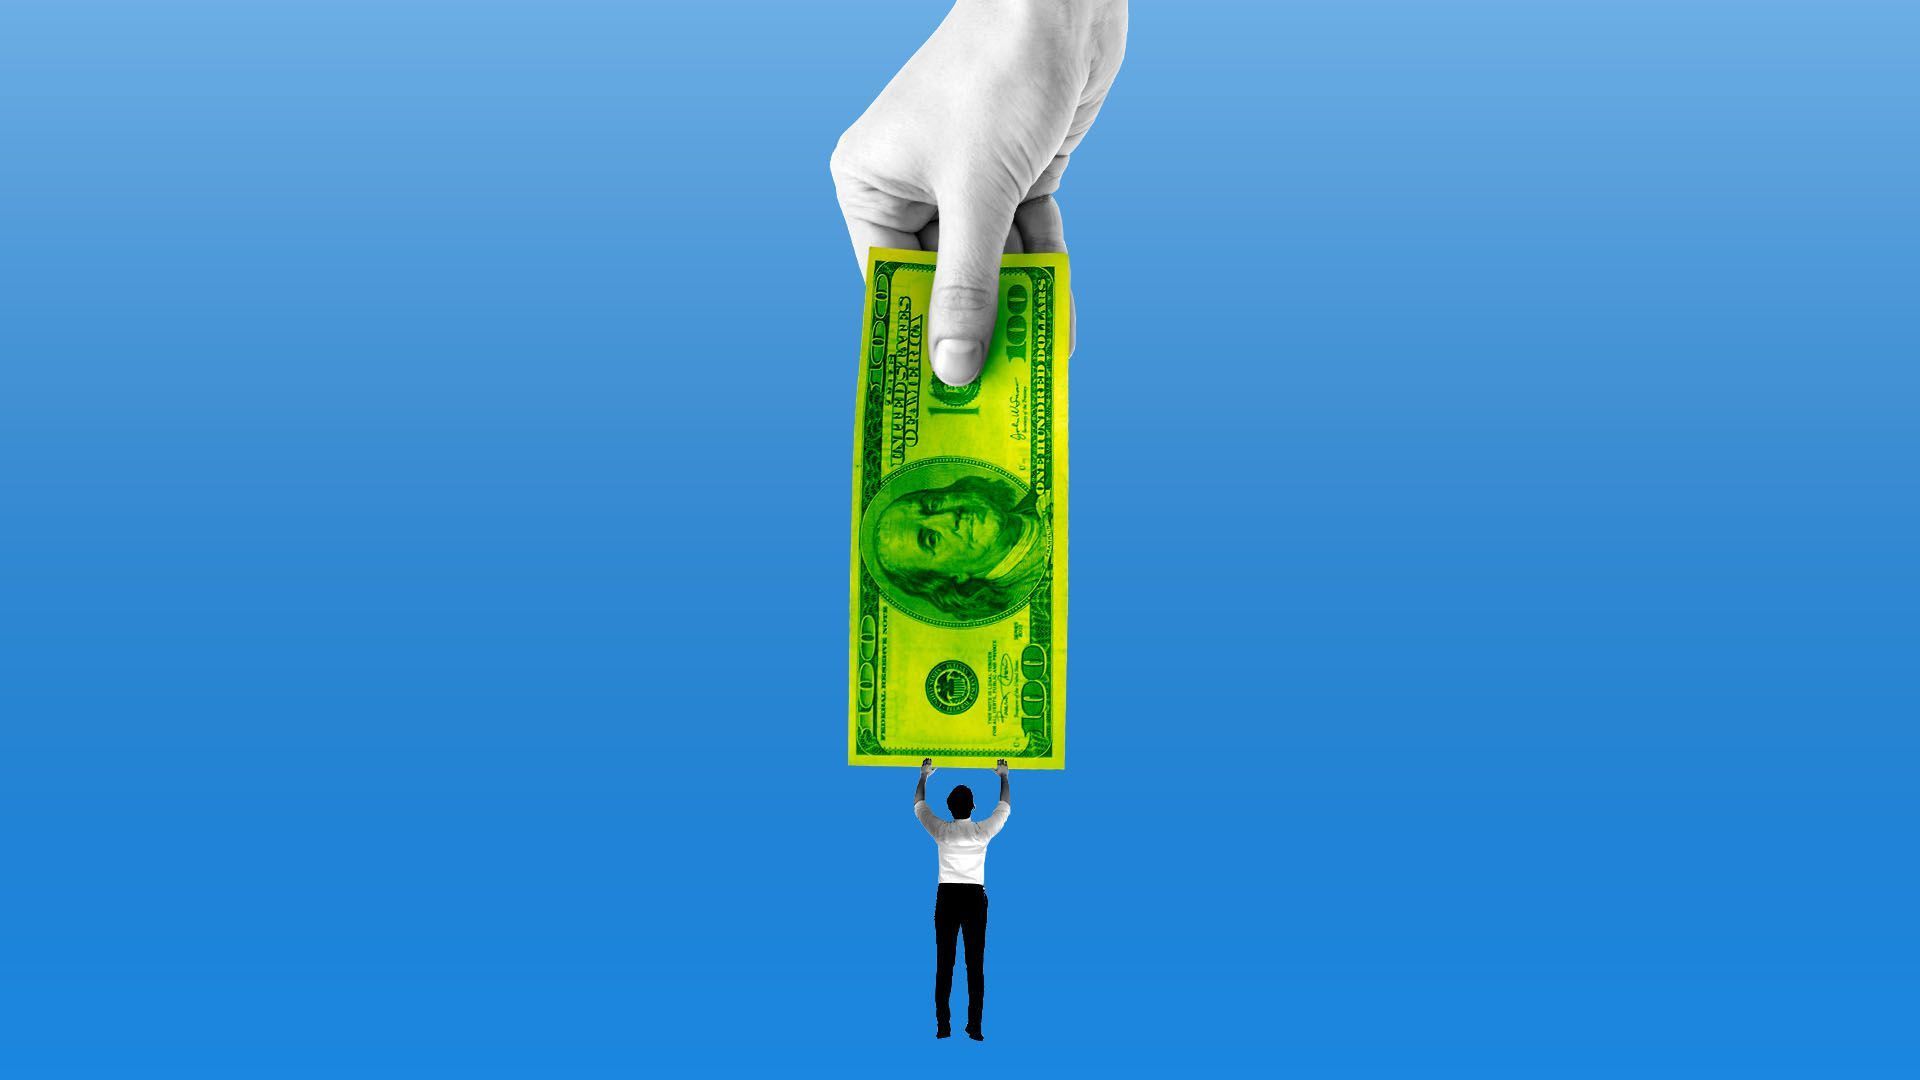 Illustration of a man dangling from money